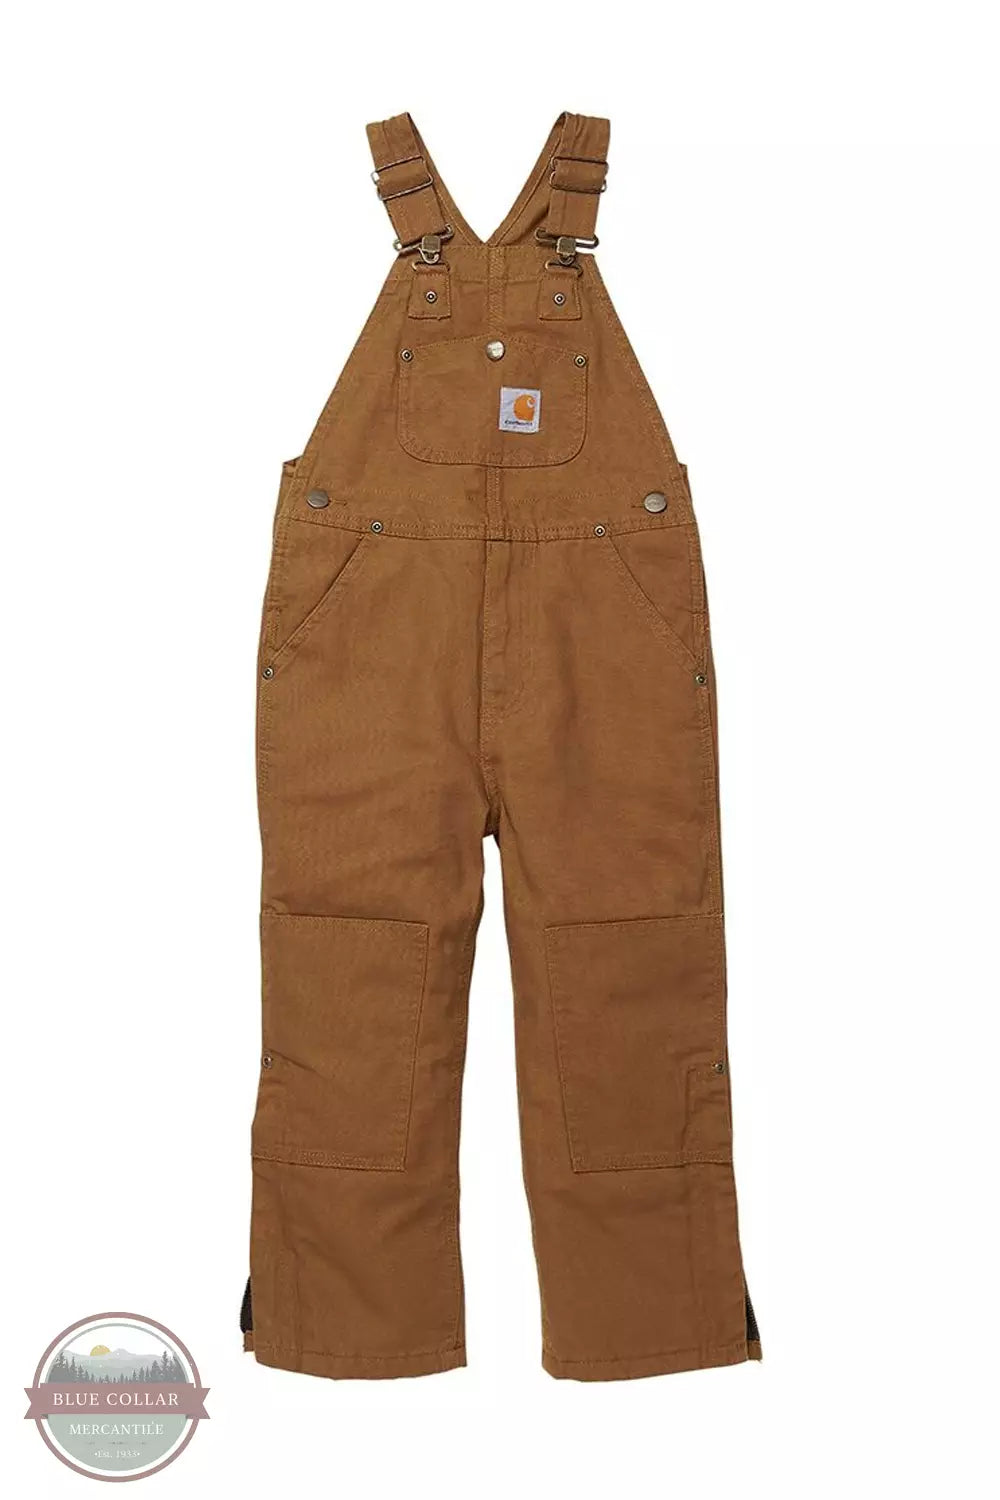 Carhartt CM8625-D15 Youth Quilted Duck Bib Overalls in Carhartt Brown Front View